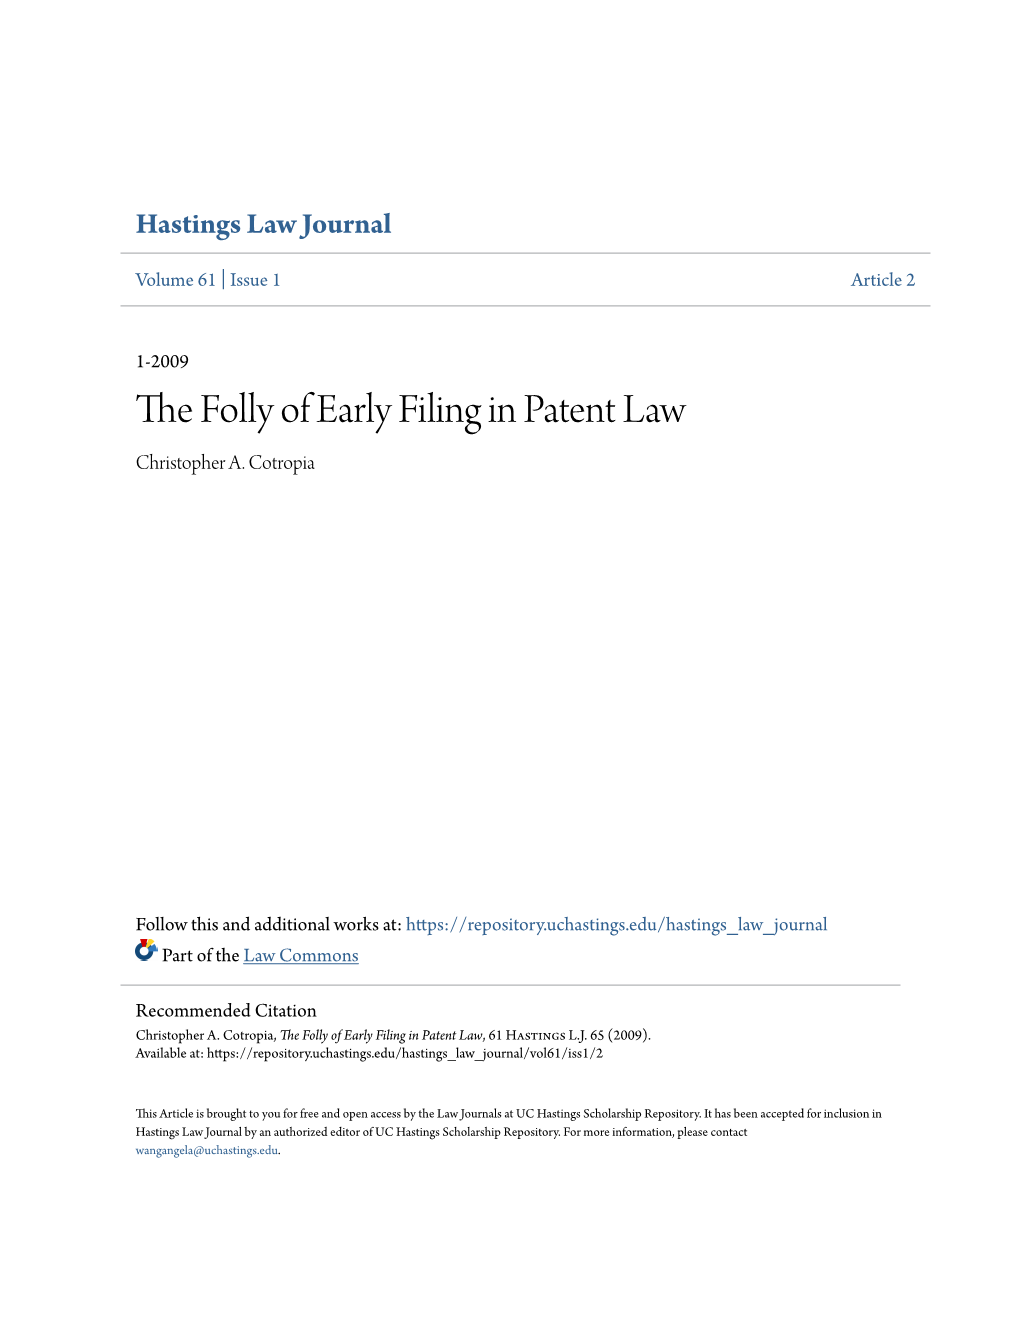 The Folly of Early Filing in Patent Law, 61 Hastings L.J